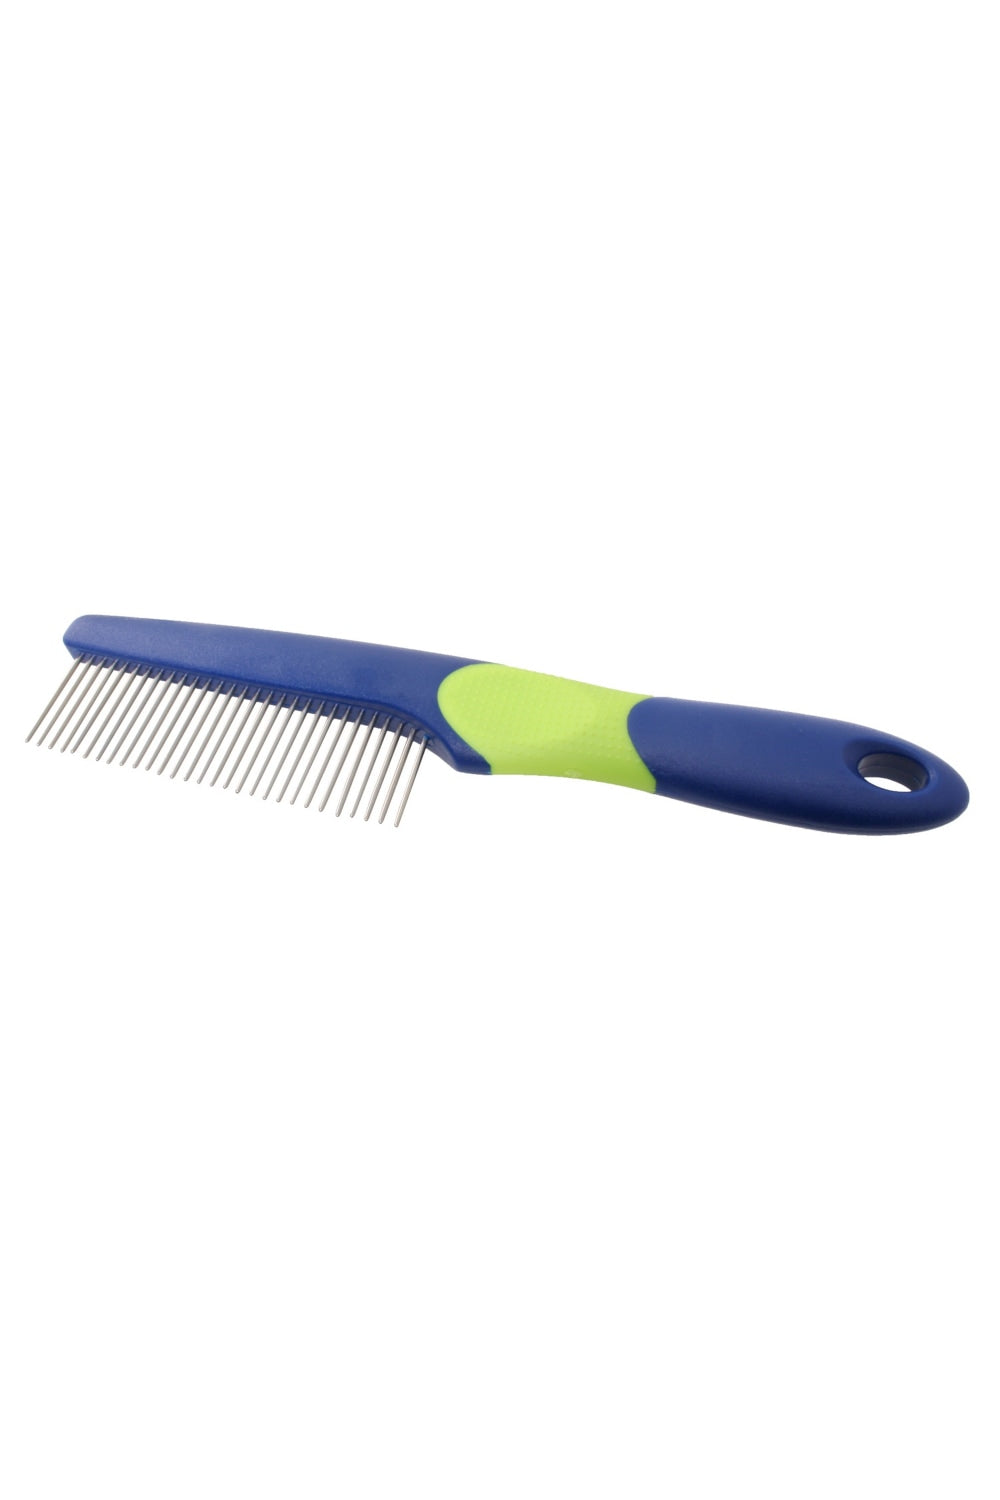 Premo Standard Medium Comb (May Vary) (One Size)